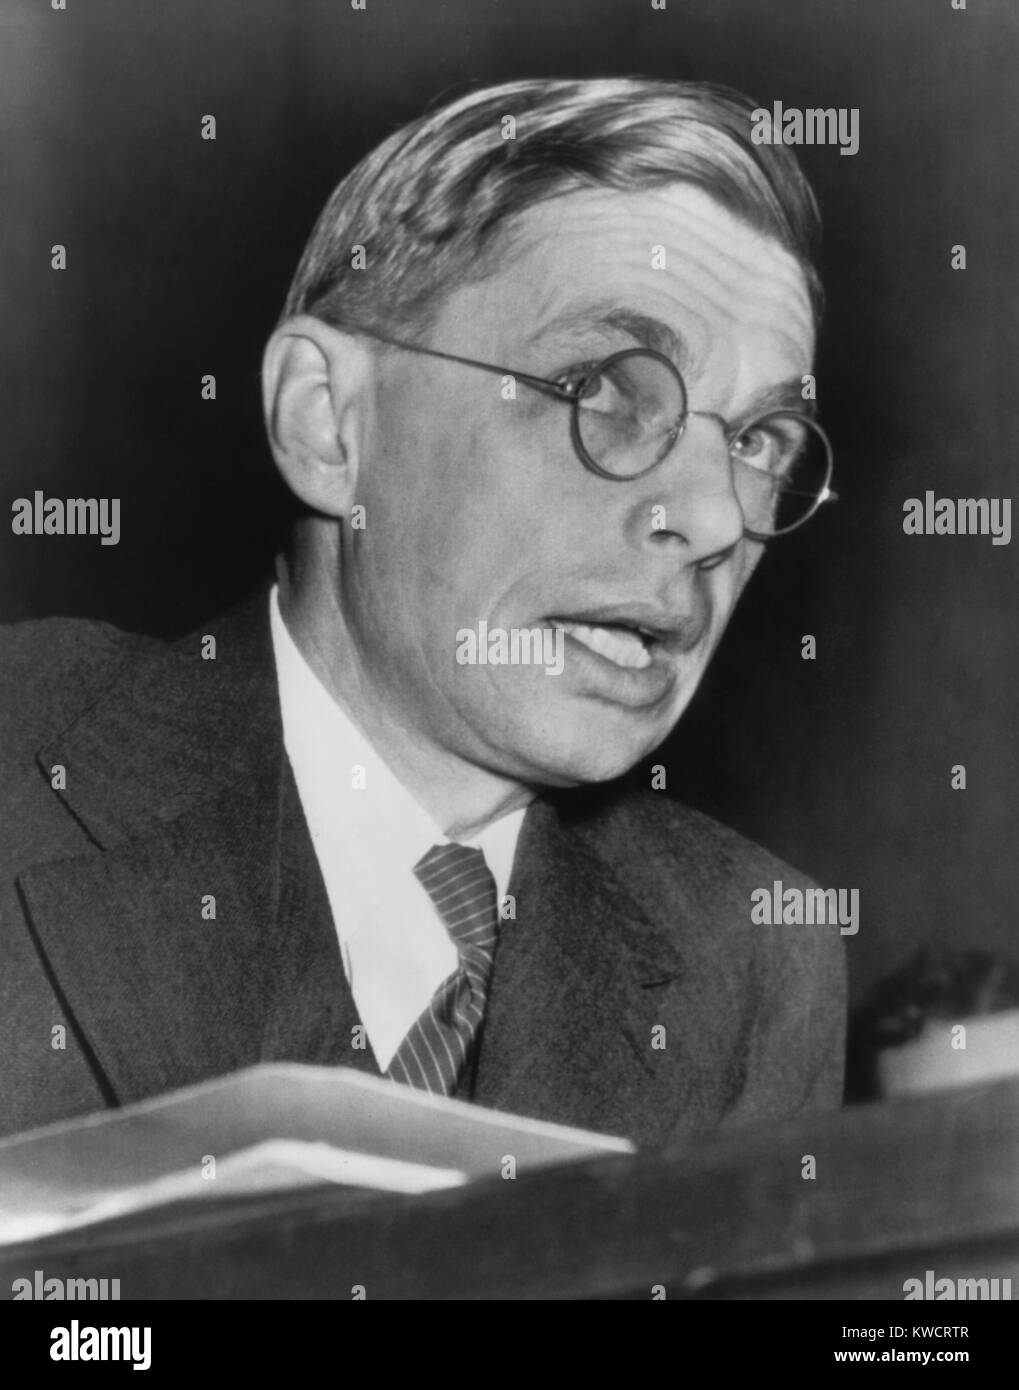 James Conant testifying before the Senate Foreign Relations Committee. In Feb. 1941, FDR's science advisor warned that Germany's military was supported by excellent science and technology. Conant was chairman of the National Defense Research Committee during WW2. - (BSLOC 2015 1 66) Stock Photo